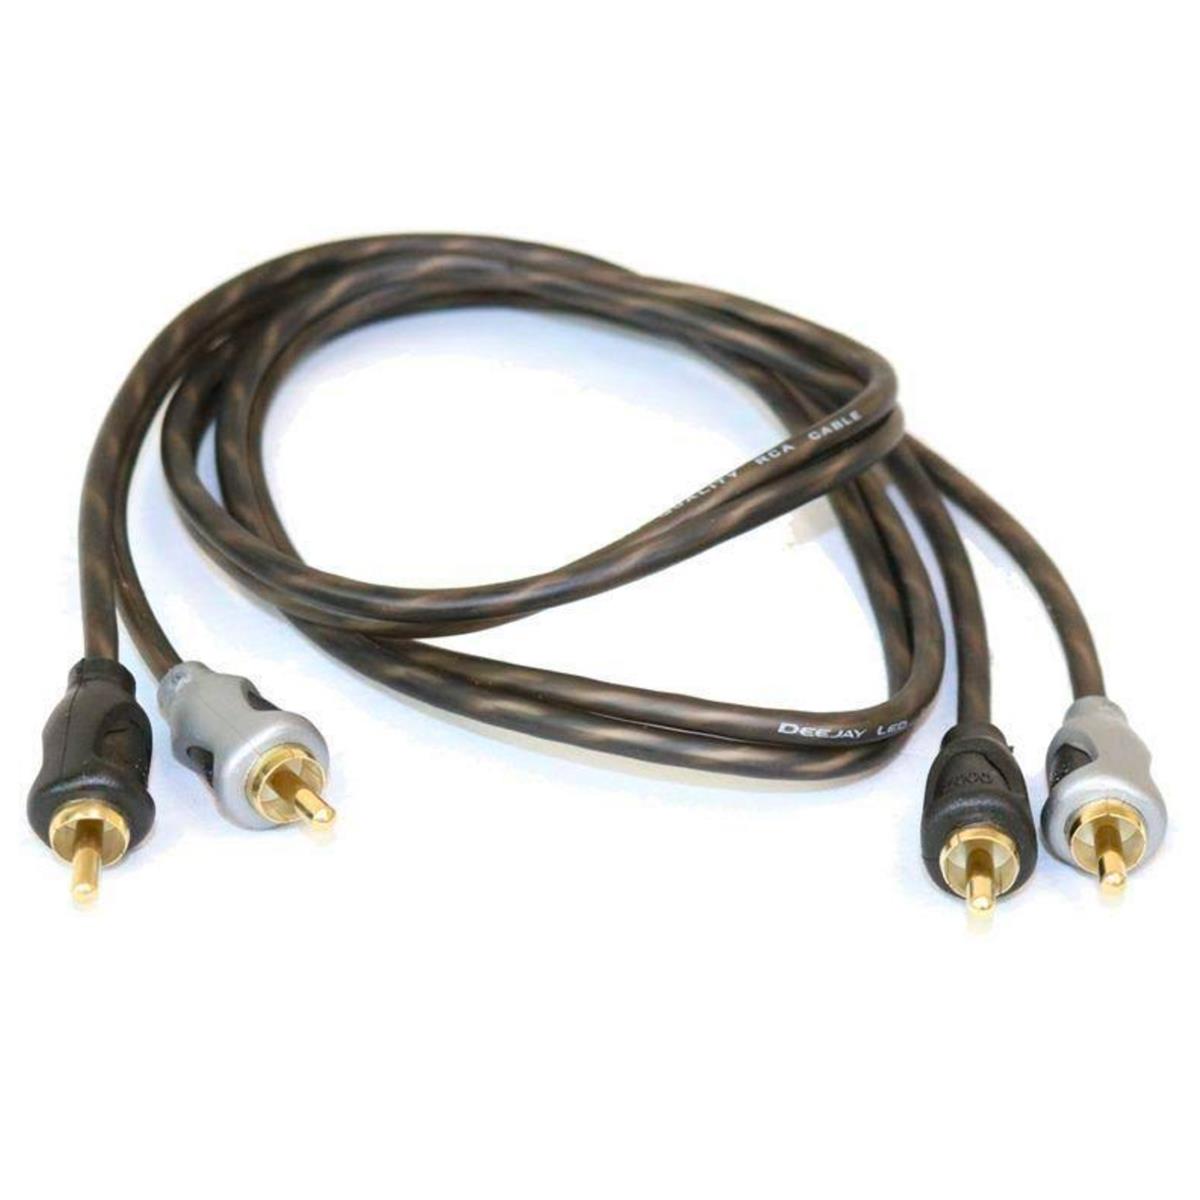 Image of Deejay LED 20' RCA to RCA Copper Audio Cable